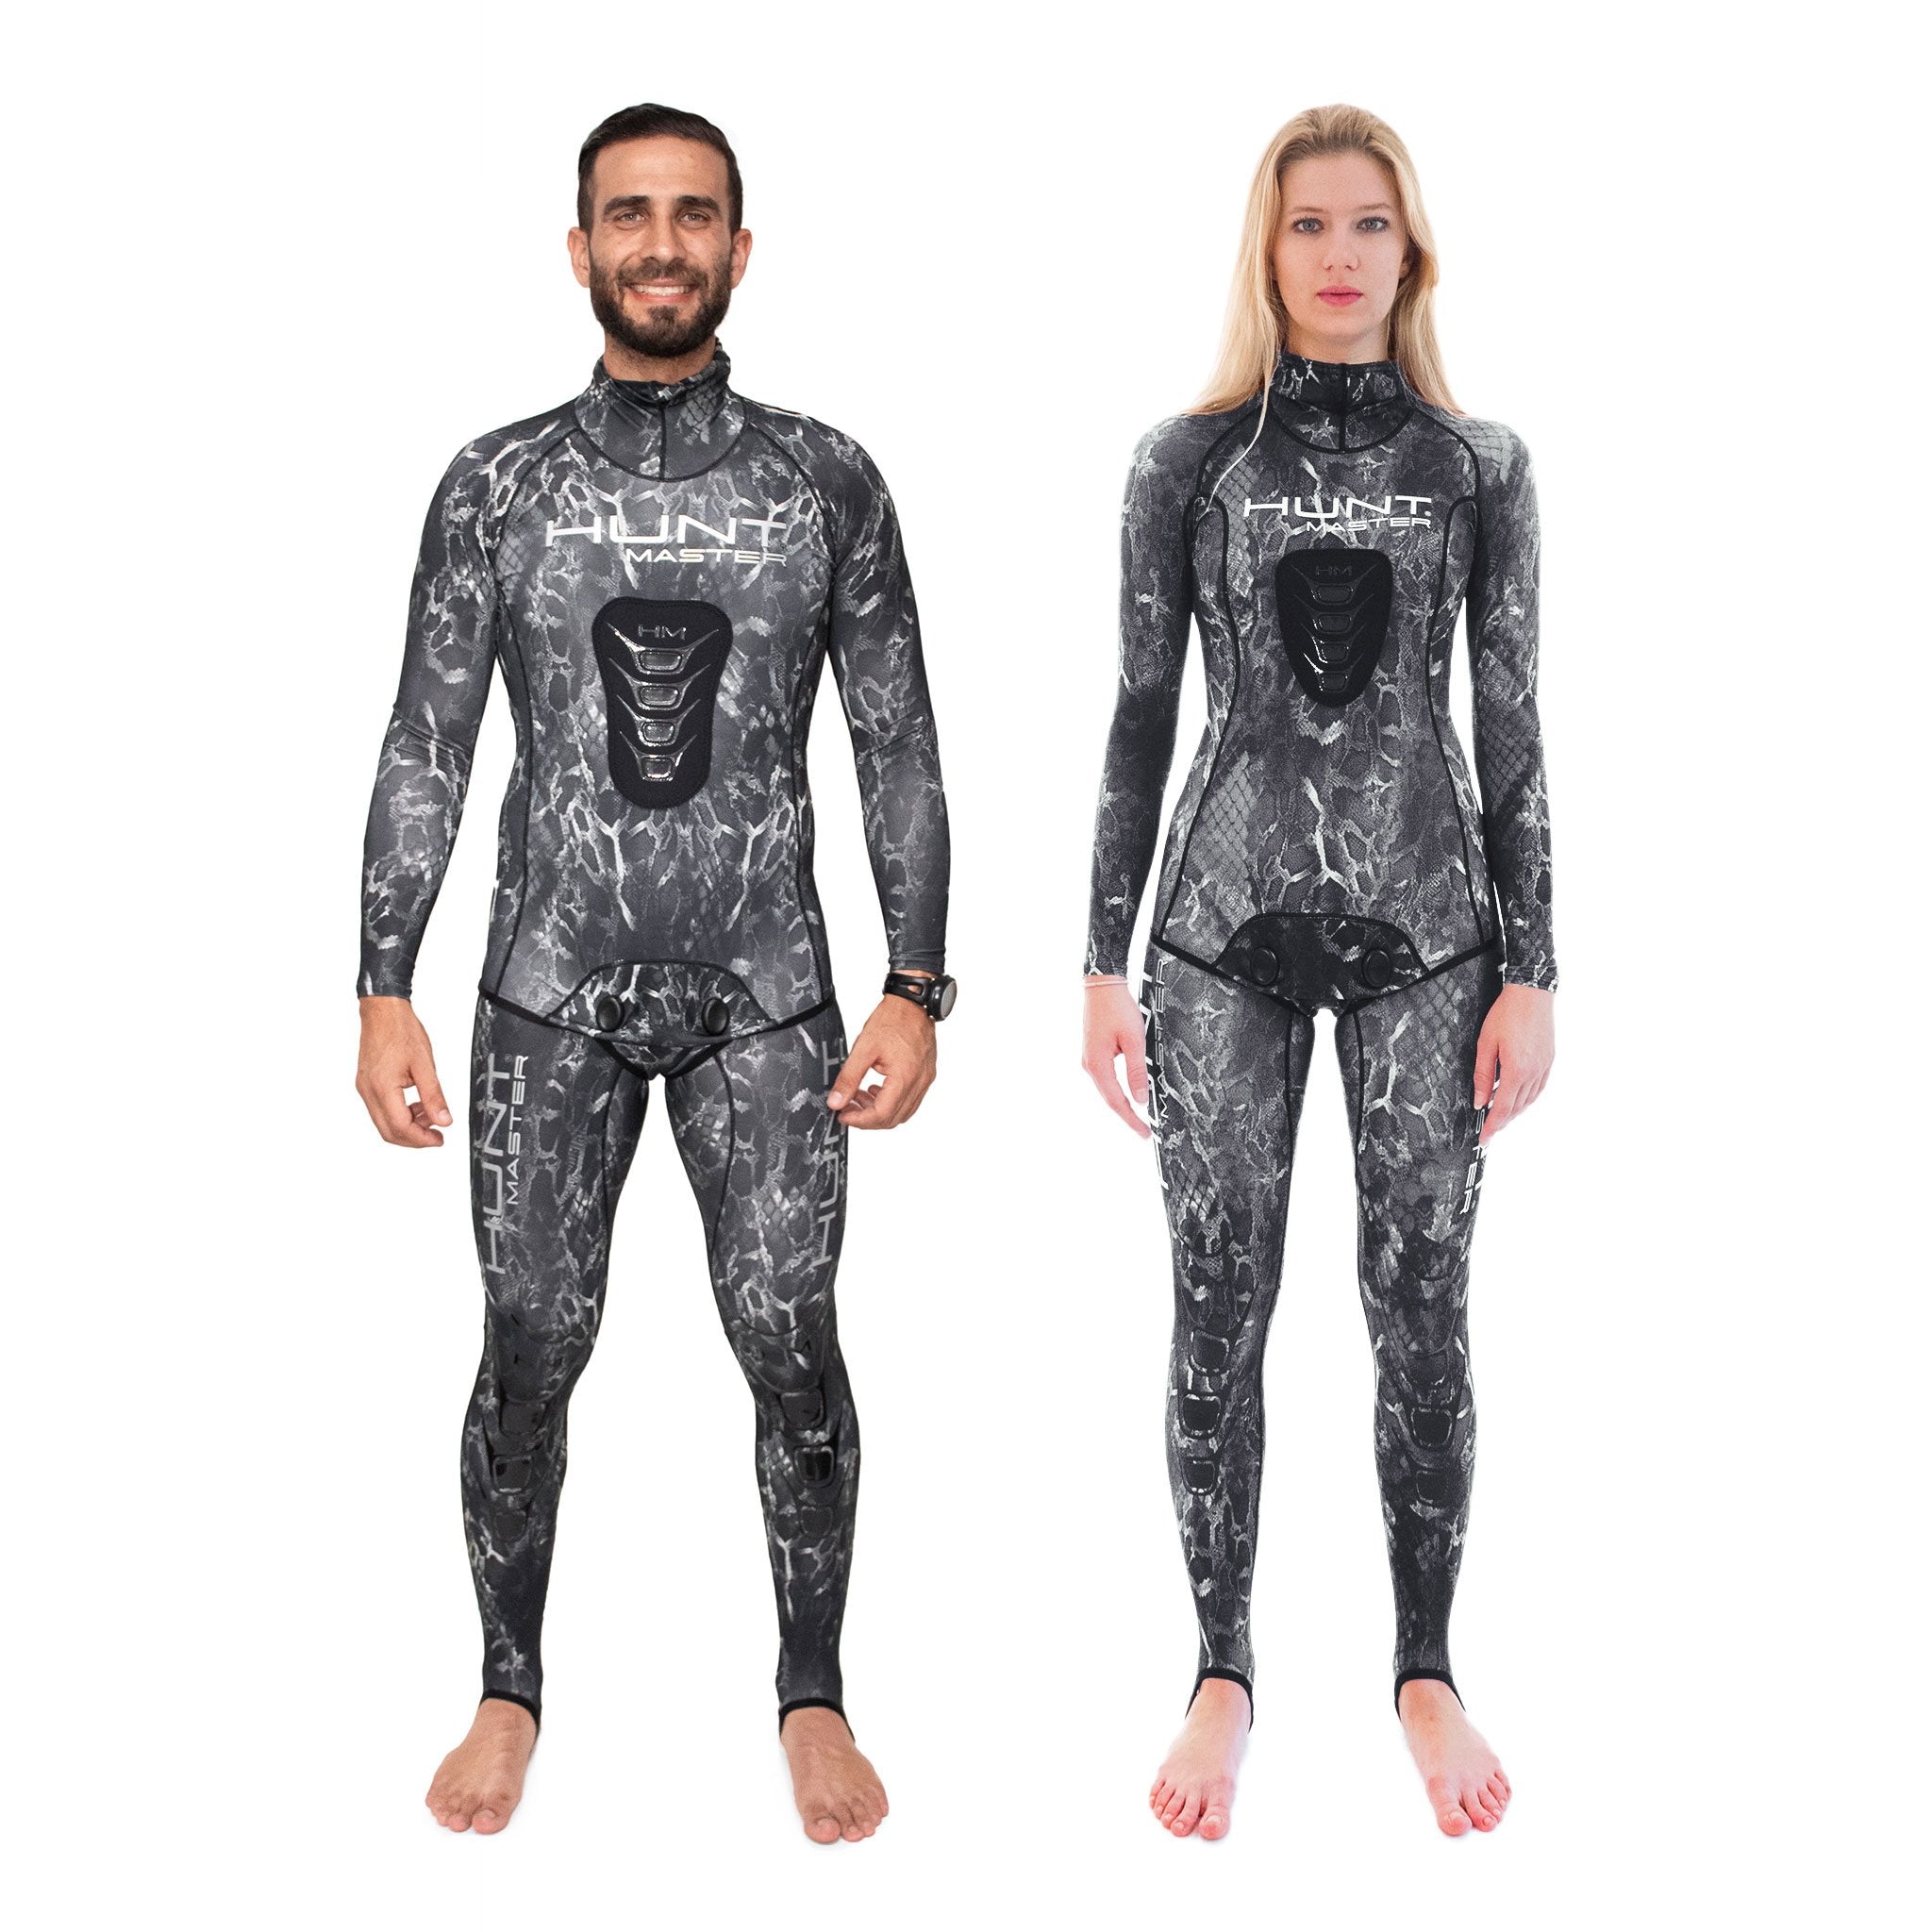 Hooded Spearfishing Rashguard Top and Long John Pants With Chest Pad Combo - Camo - Unisex - Silver